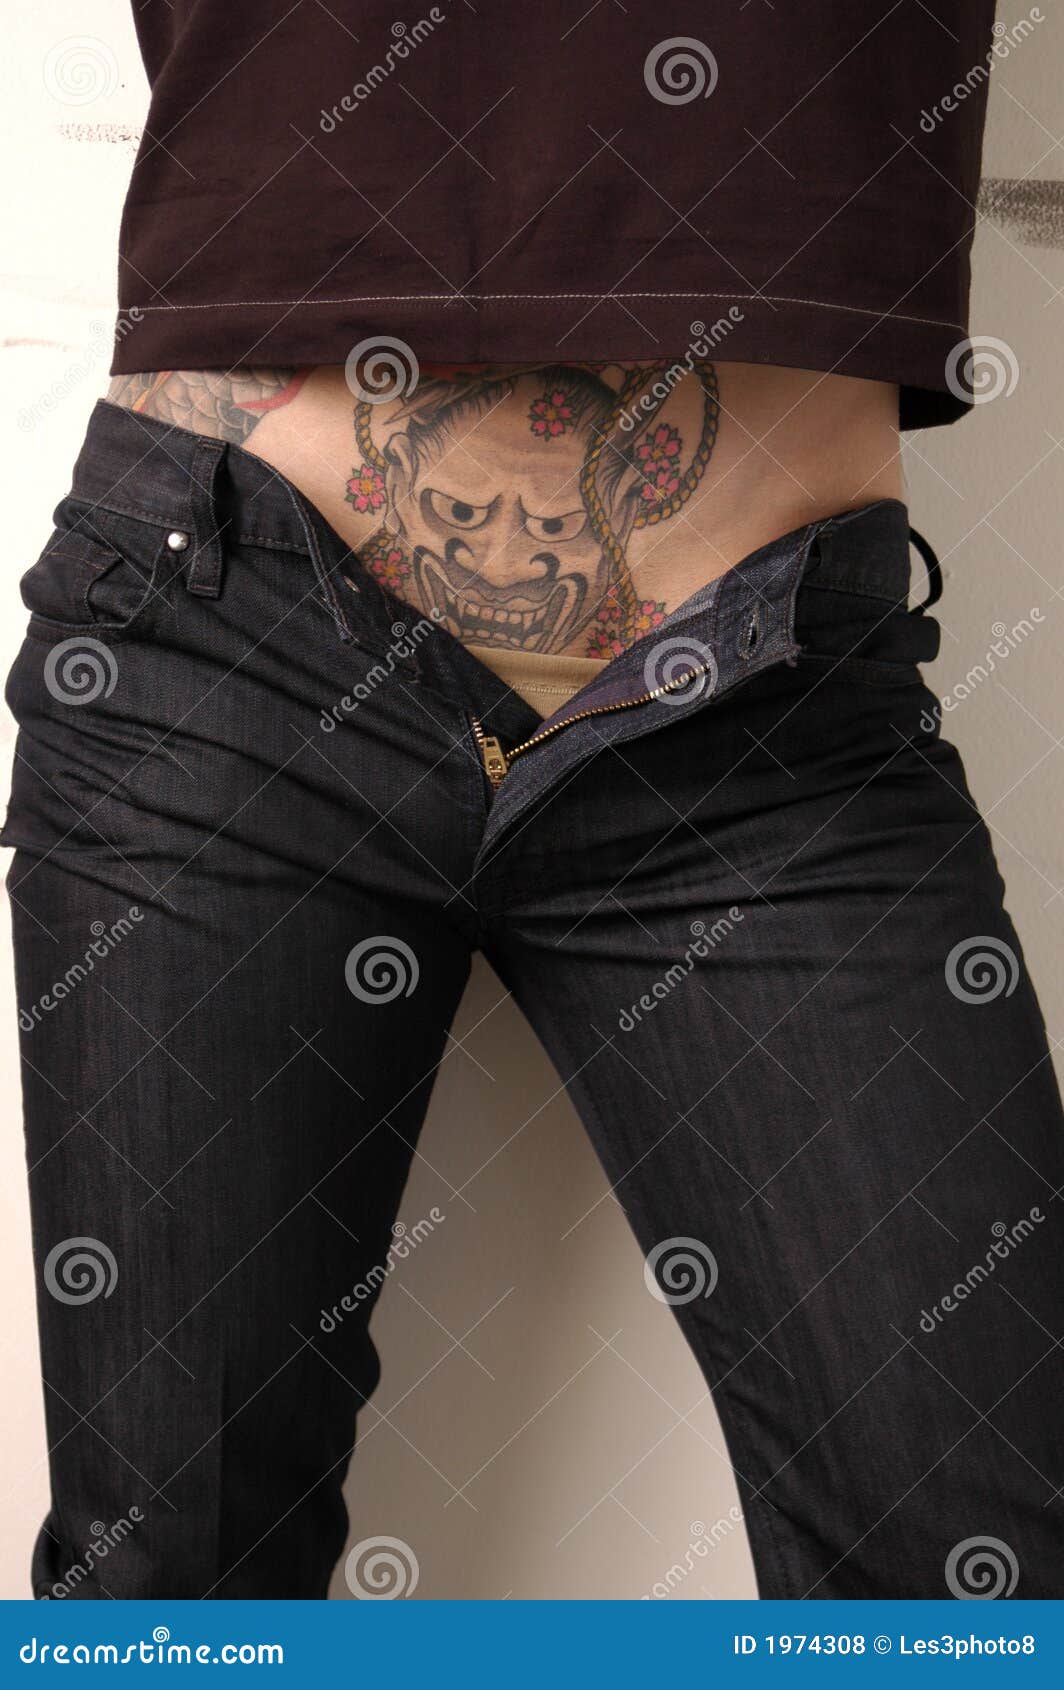 Guardian of his crotch editorial stock photo. Image of tattoo - 1974308